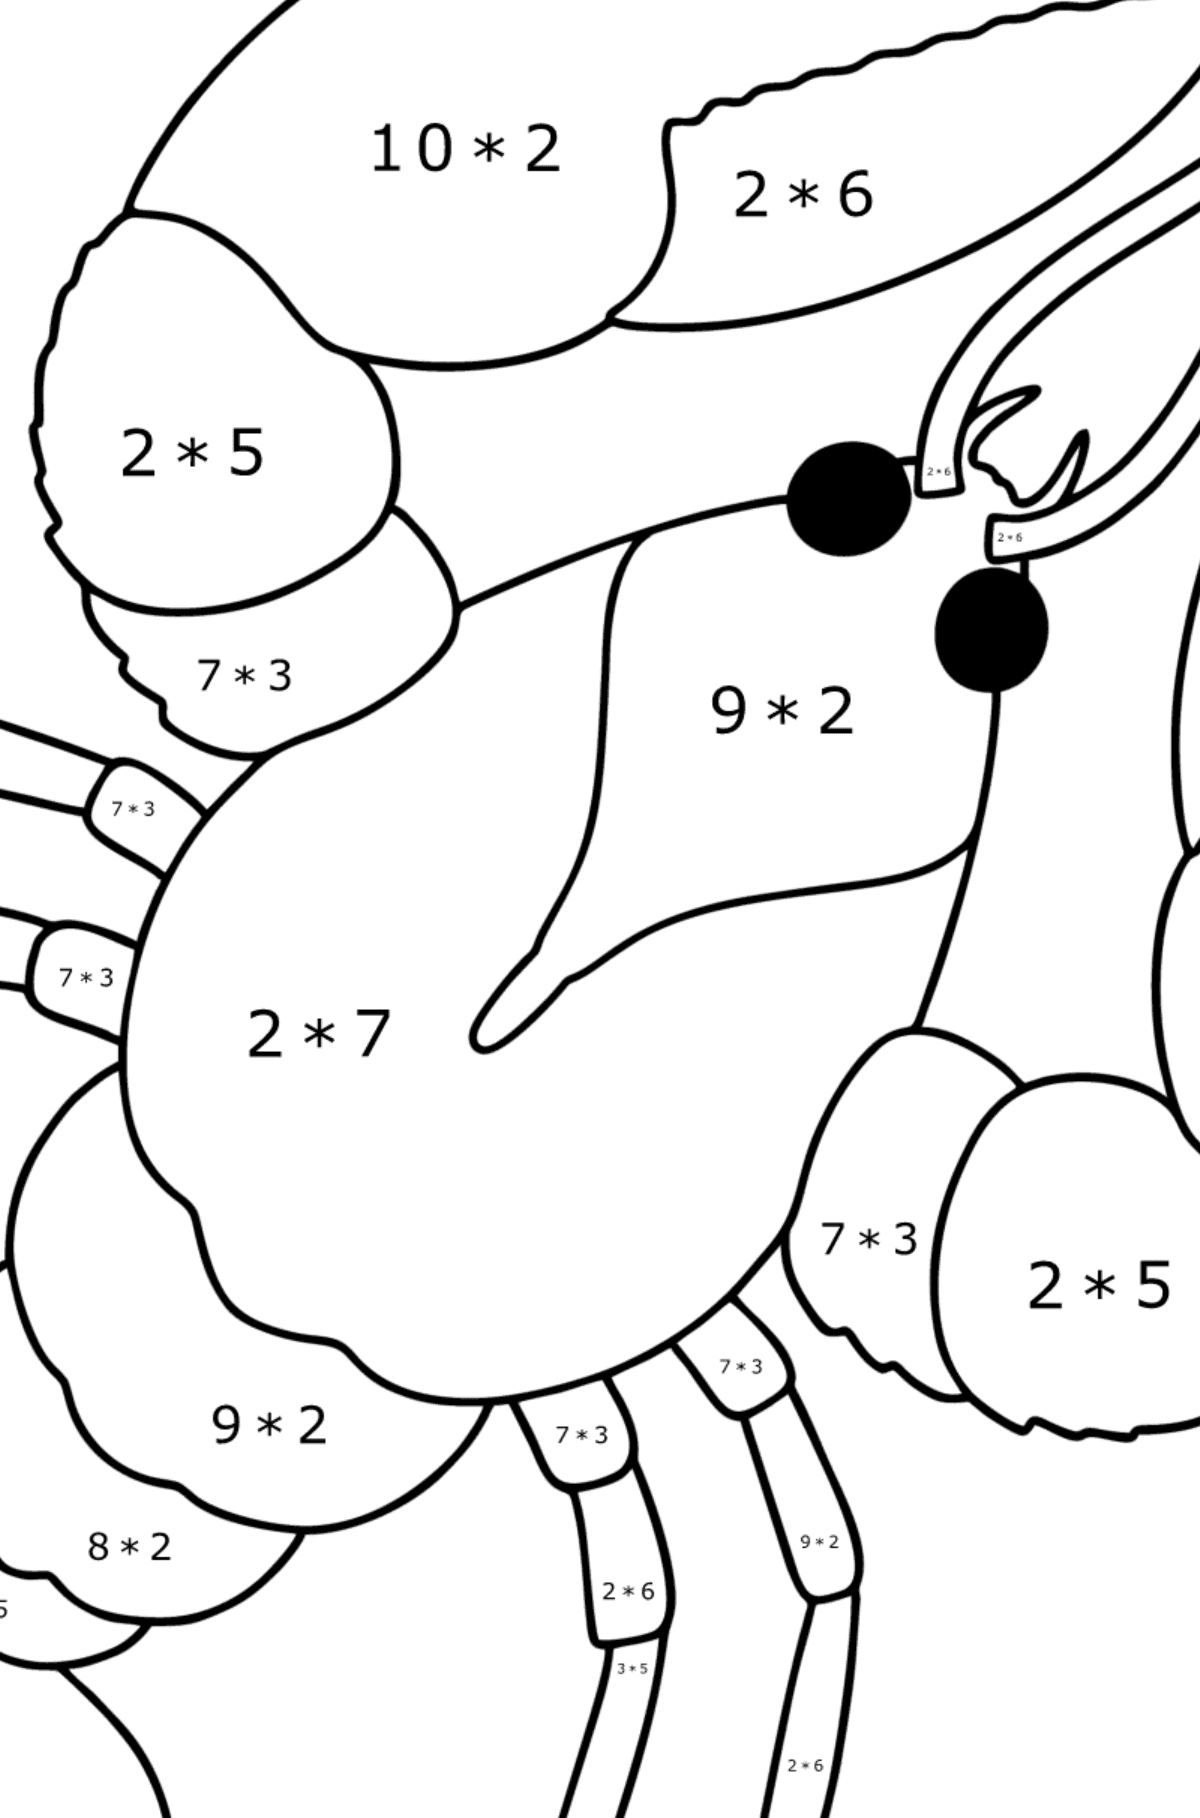 Lobster coloring page - Math Coloring - Multiplication for Kids